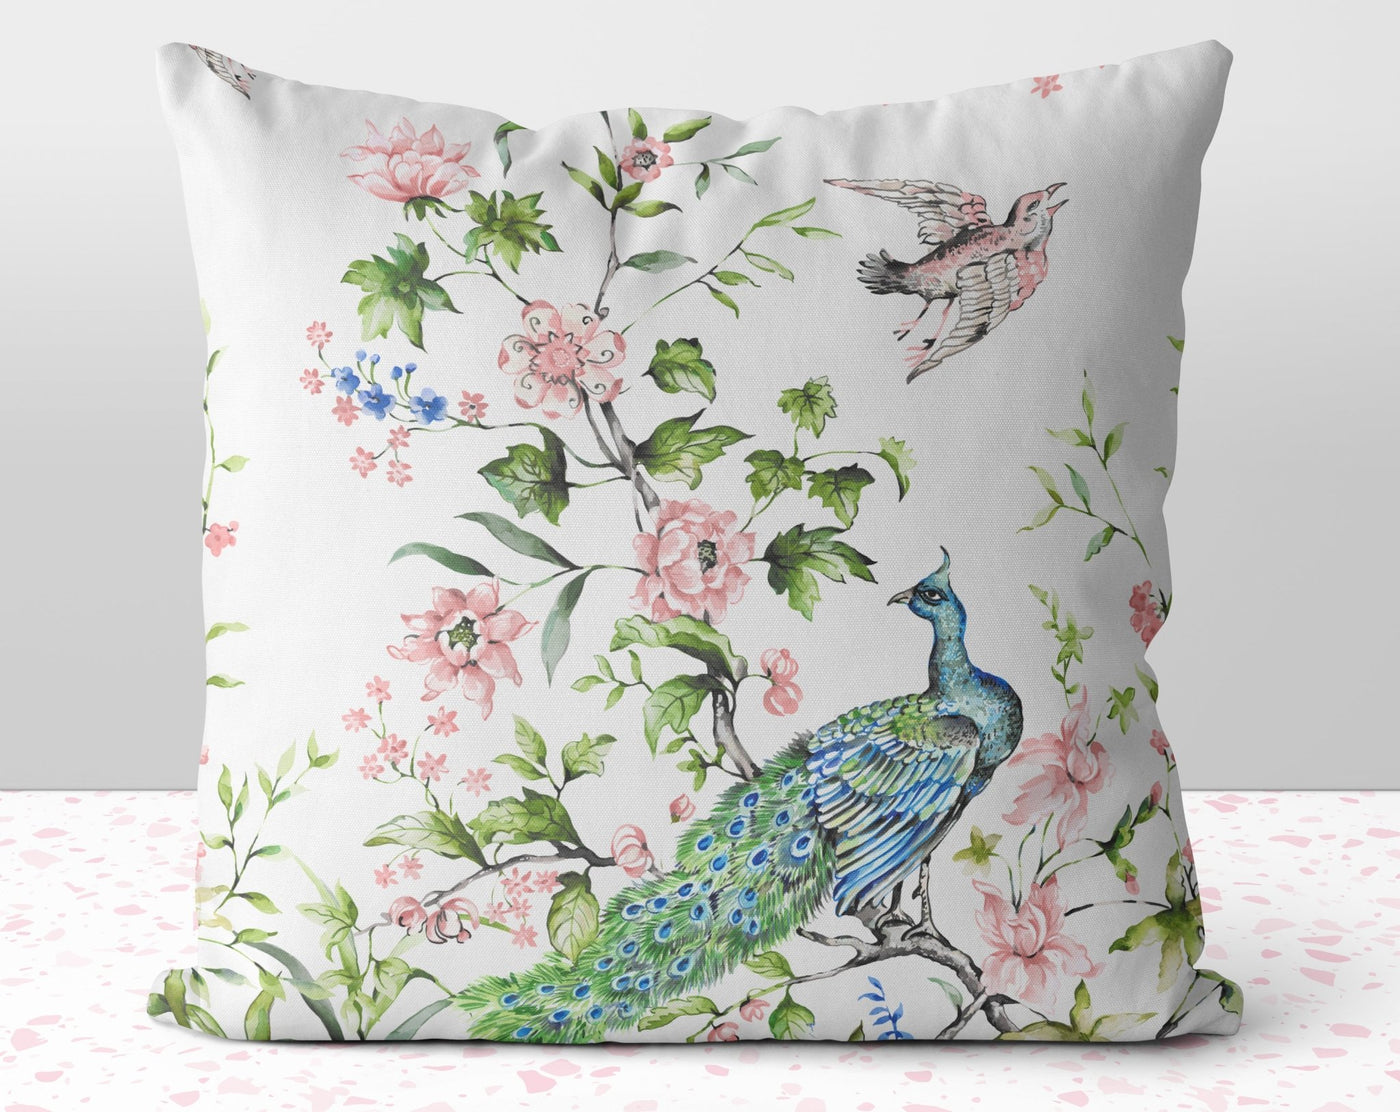 Floral Peacock Chinoiserie Flowers Pink on White Square Pillow with Cover Throw with Insert - Cush Potato Pillows